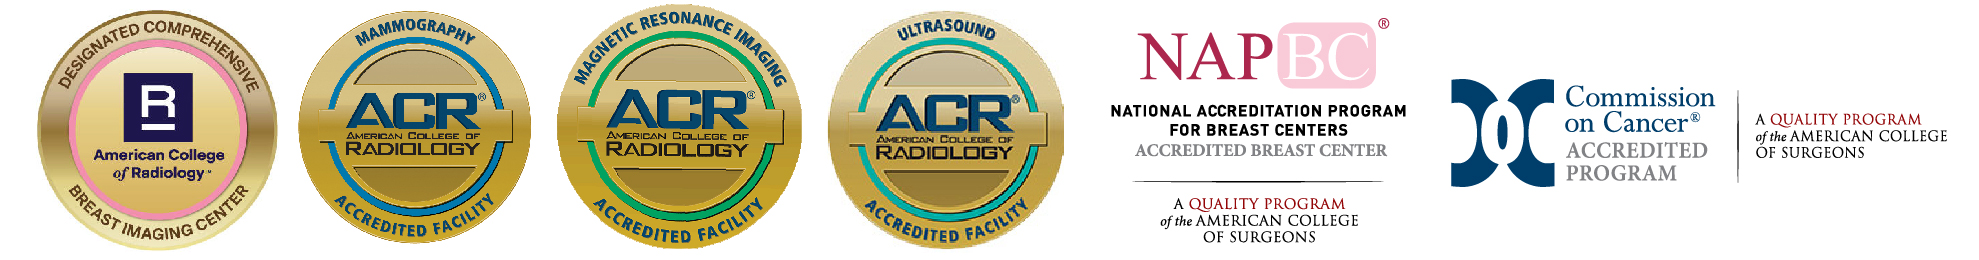 American College of Radiology, American College of Surgeons, National Accreditation Program for Breast Cancer, and Commission on Cancer accreditation logos